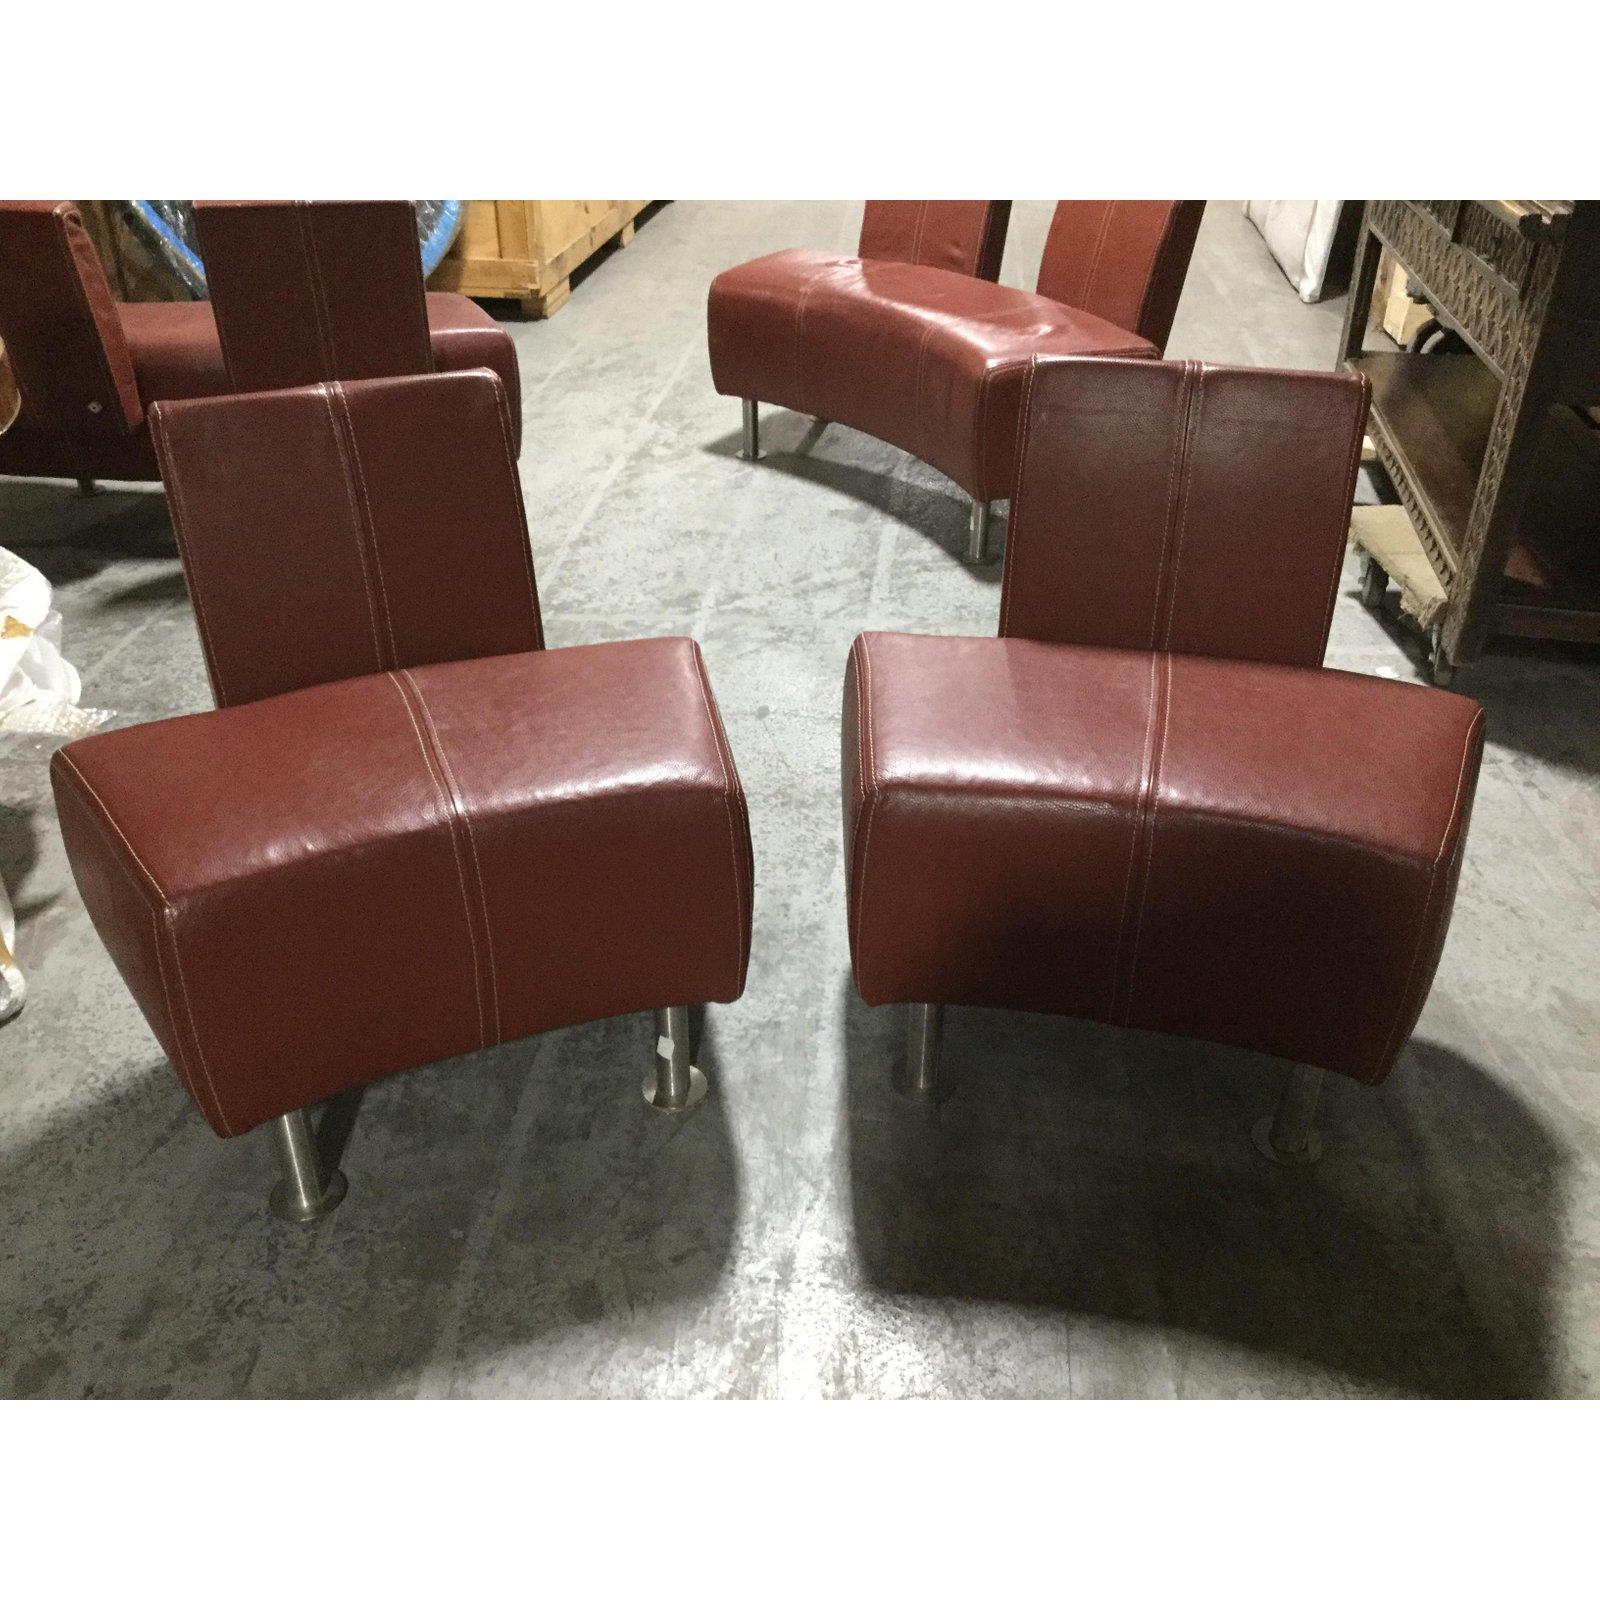 Exceptional Italian designer chic ox blood leather salon set including a curved loveseat and 2 side with white top stitching and cool steel industrial legs. The loveseat bench has a slight curve in the front and would be great floating in a room